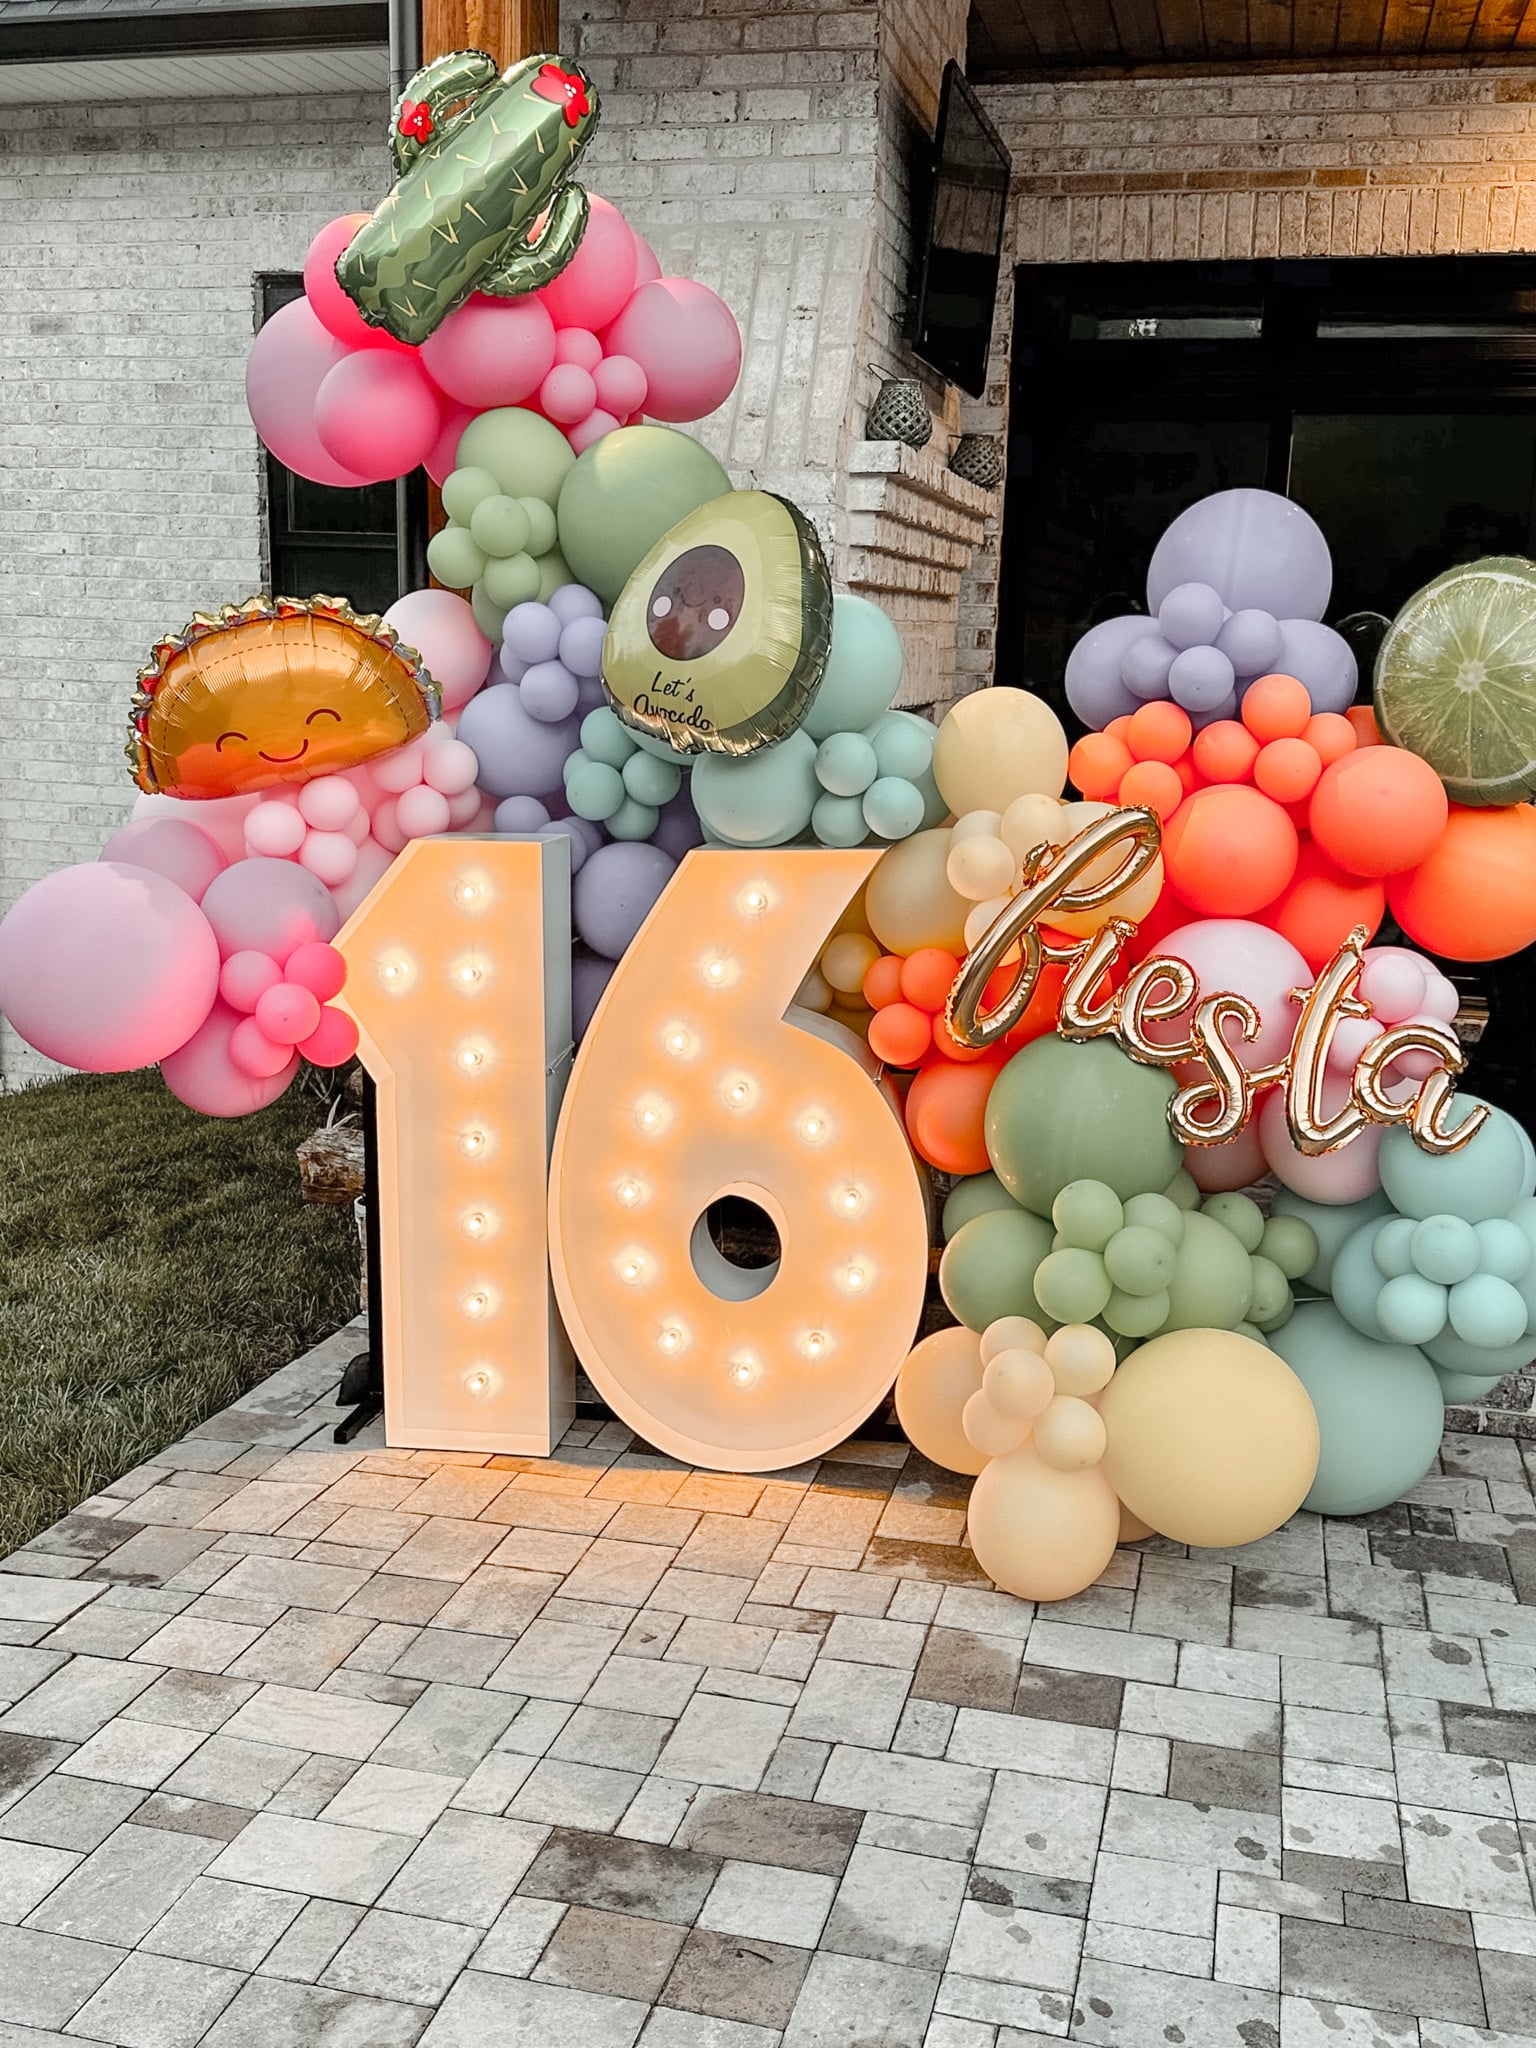 Light Up Numbers "16" beside a balloon display for a Sweet 16 party